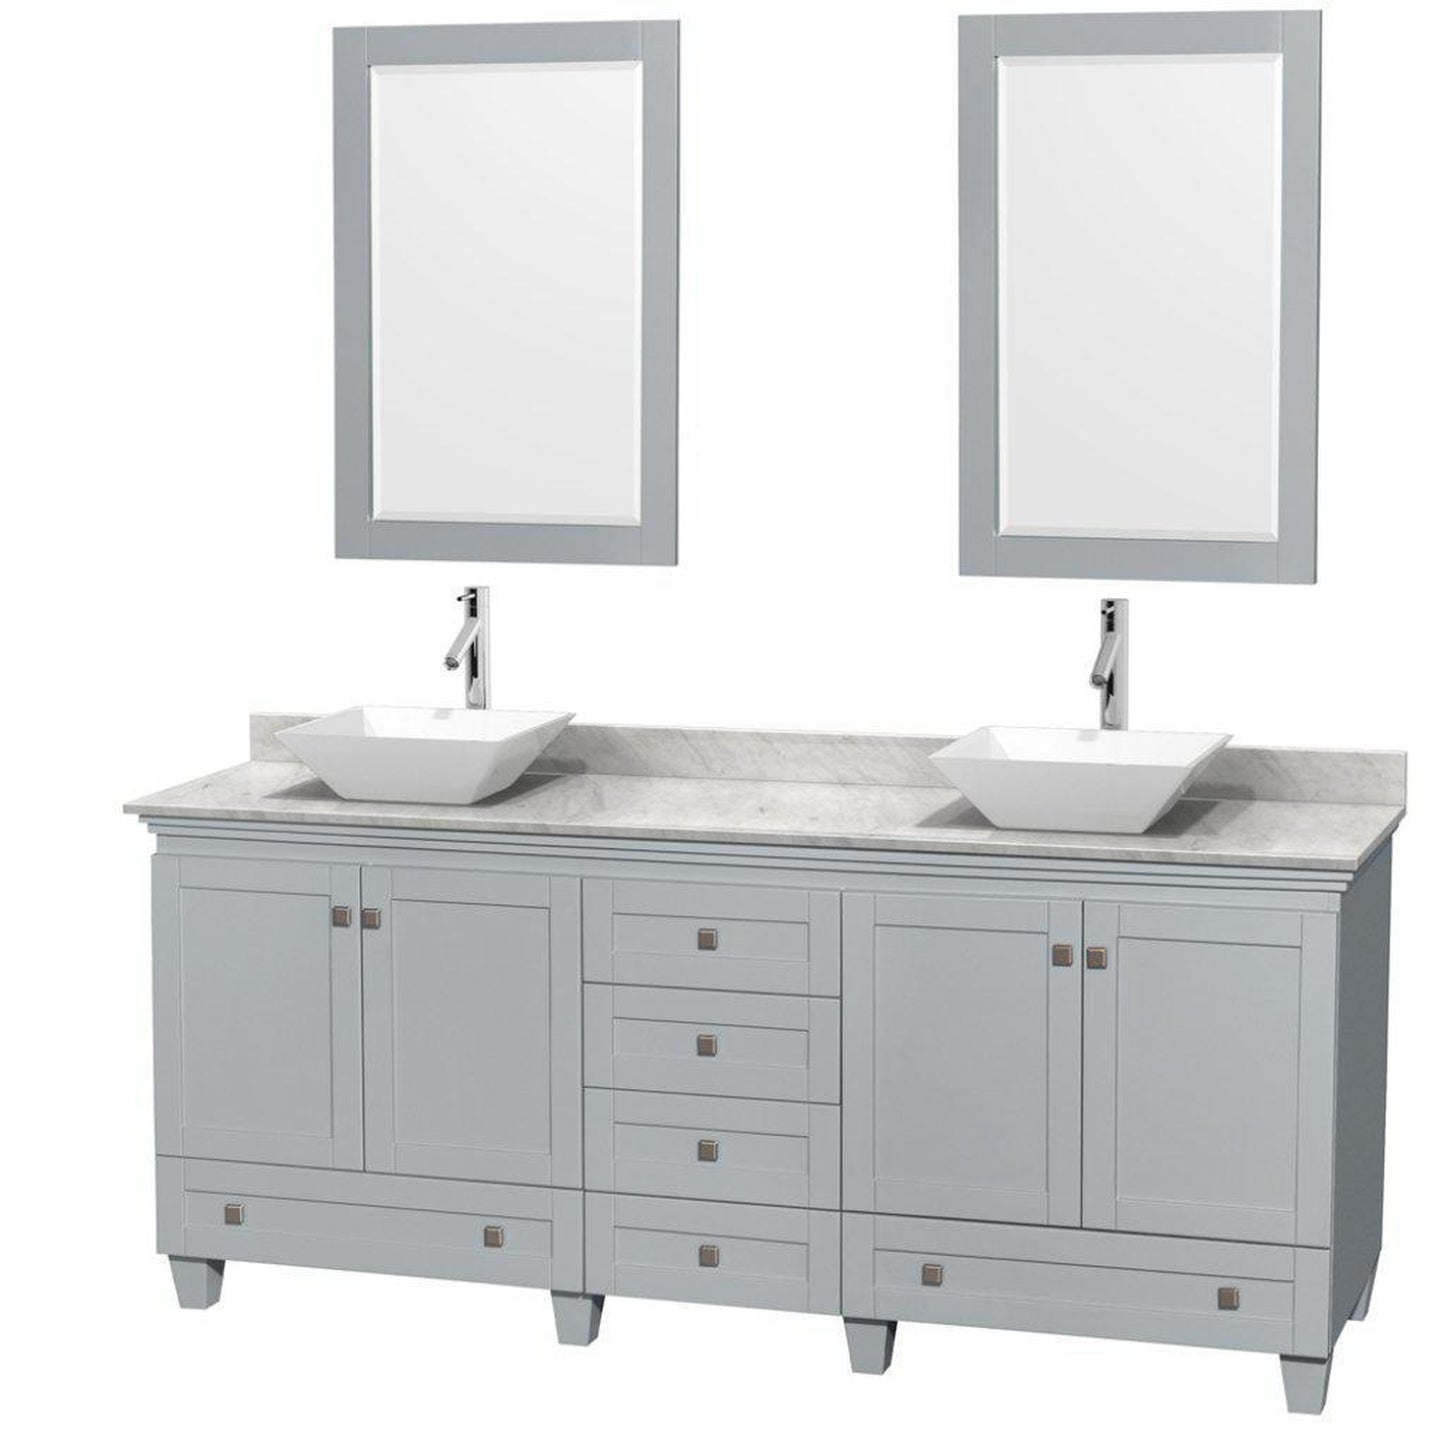 Wyndham Collection Acclaim 80" Double Bathroom Oyster Gray Vanity With White Carrara Marble Countertop And Pyra White Porcelain Sinks And 2 Set Of 24" Mirror